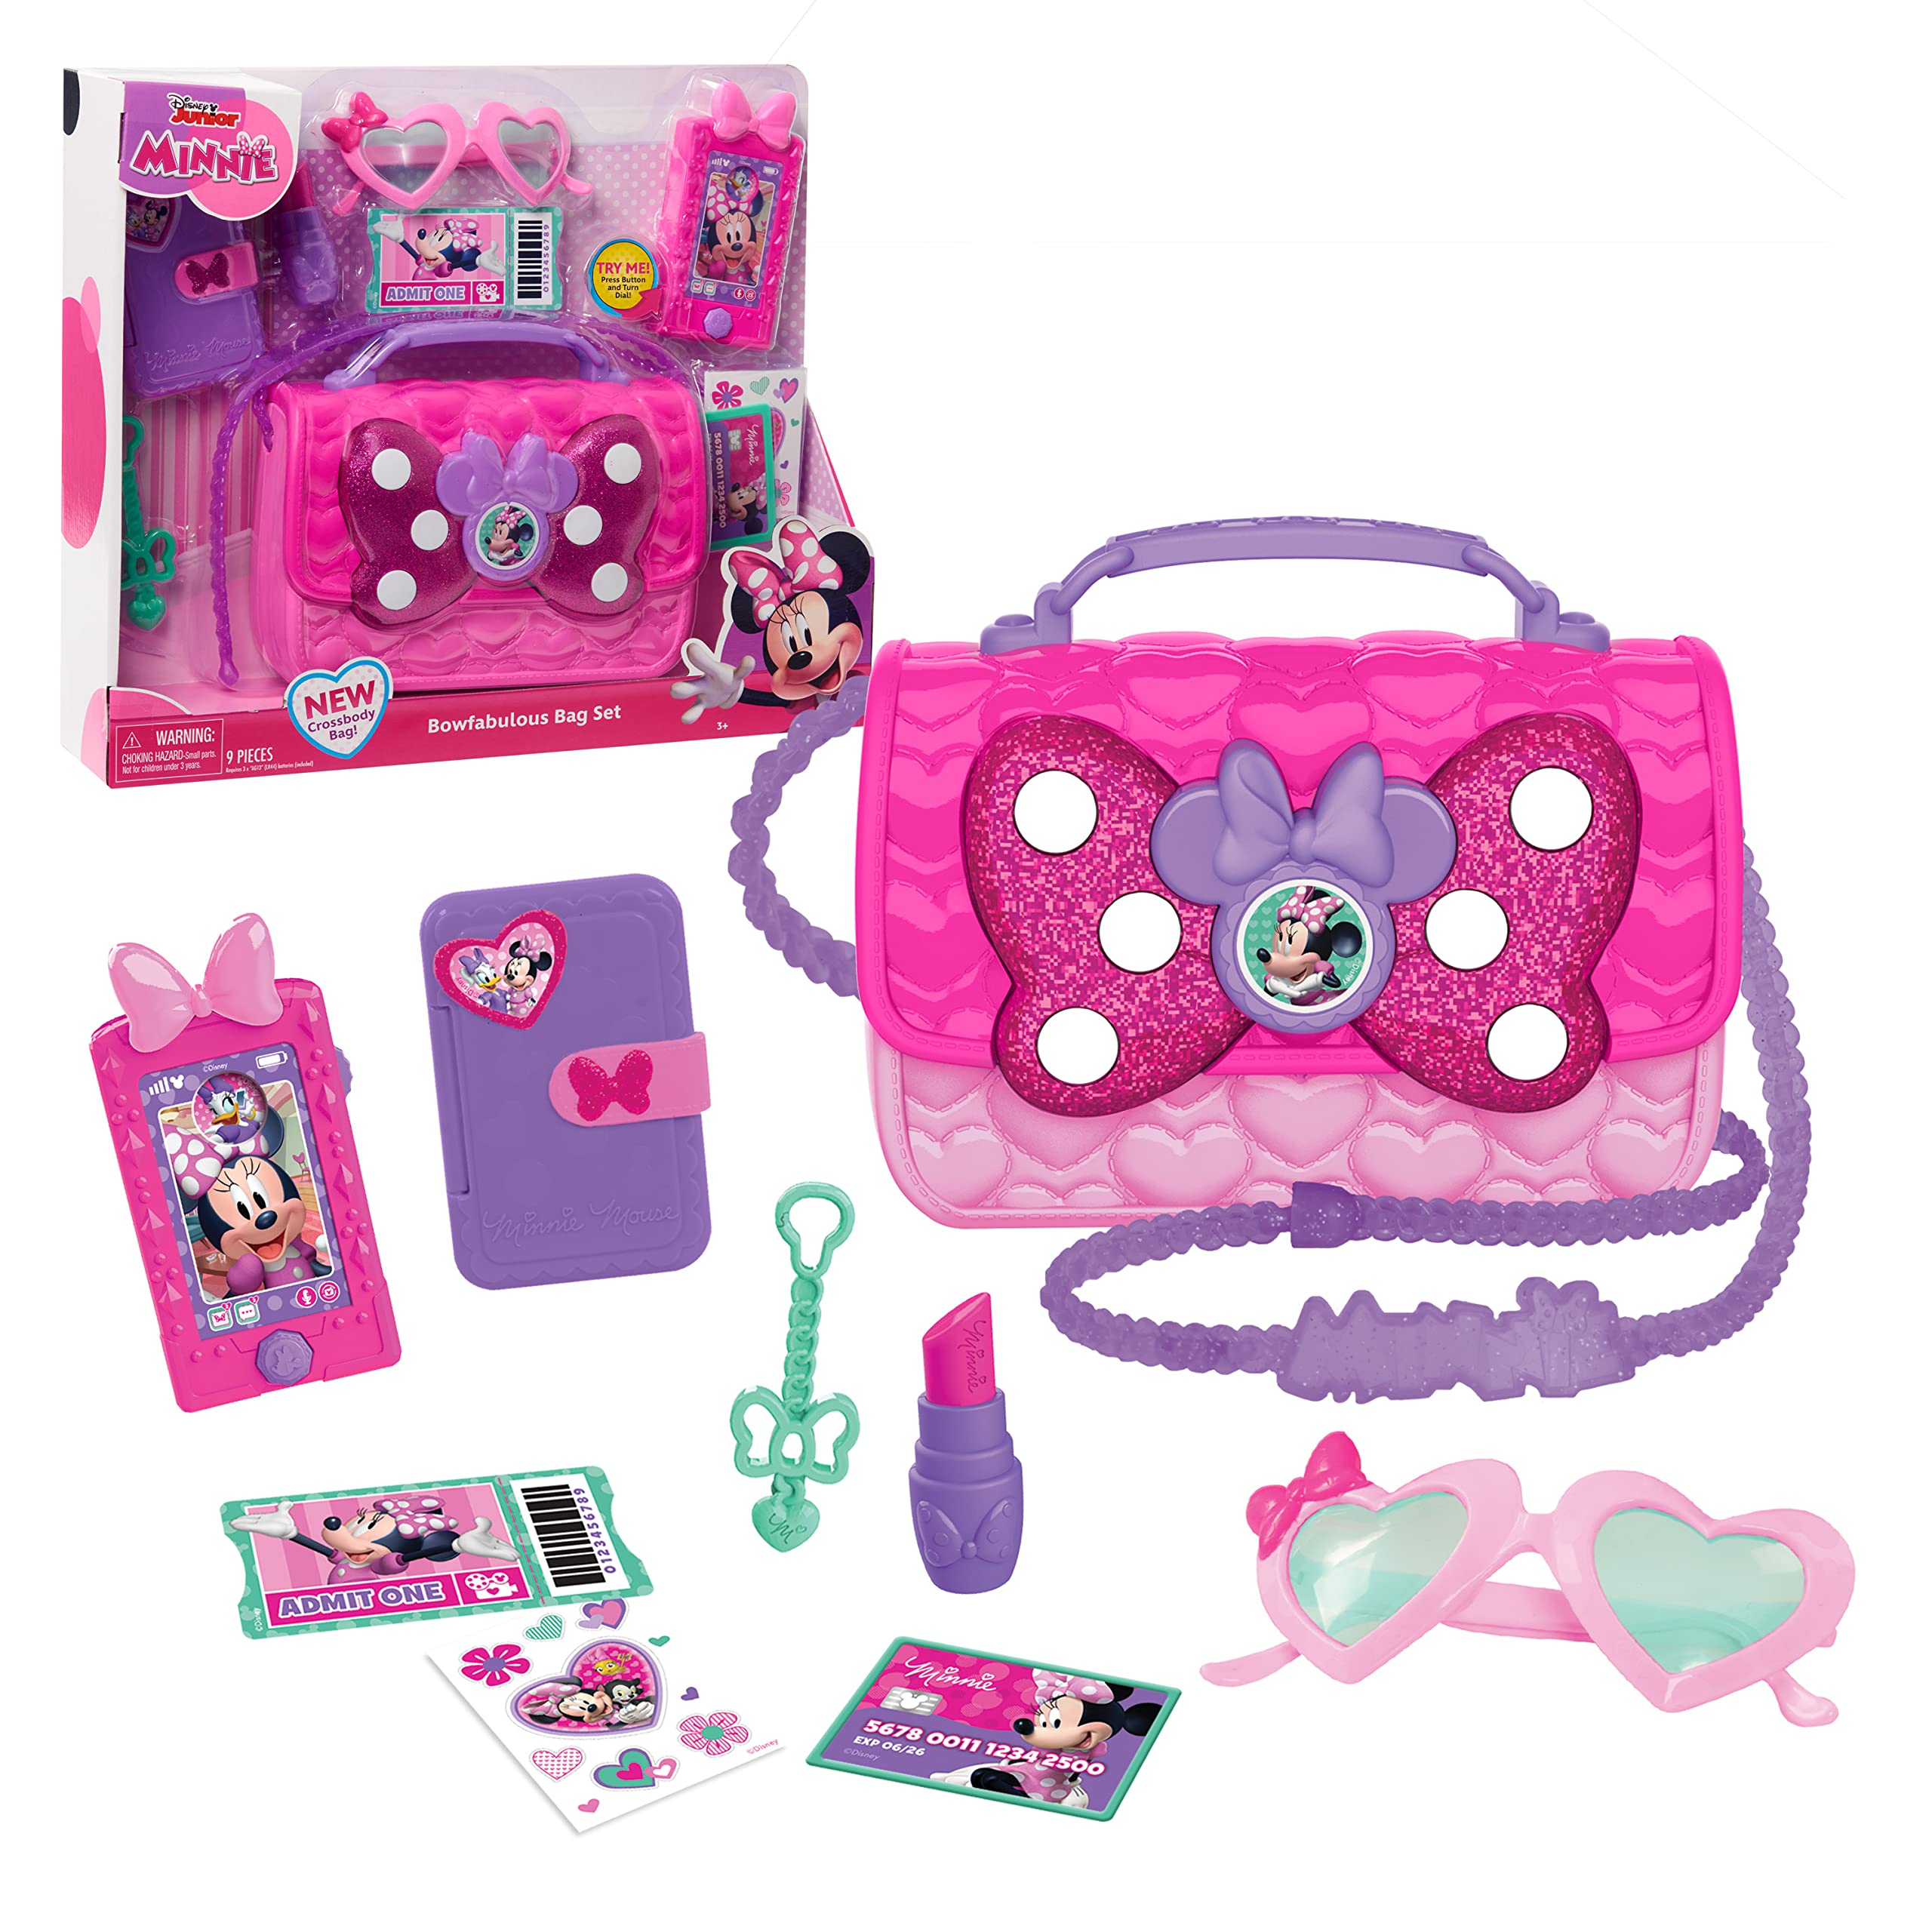 Just Play Disney Junior Minnie Mouse Bowfabulous Bag Set, 9 Piece Pretend Play Purse with Lights and Sounds cell Phone, Sunglasses, and Ac